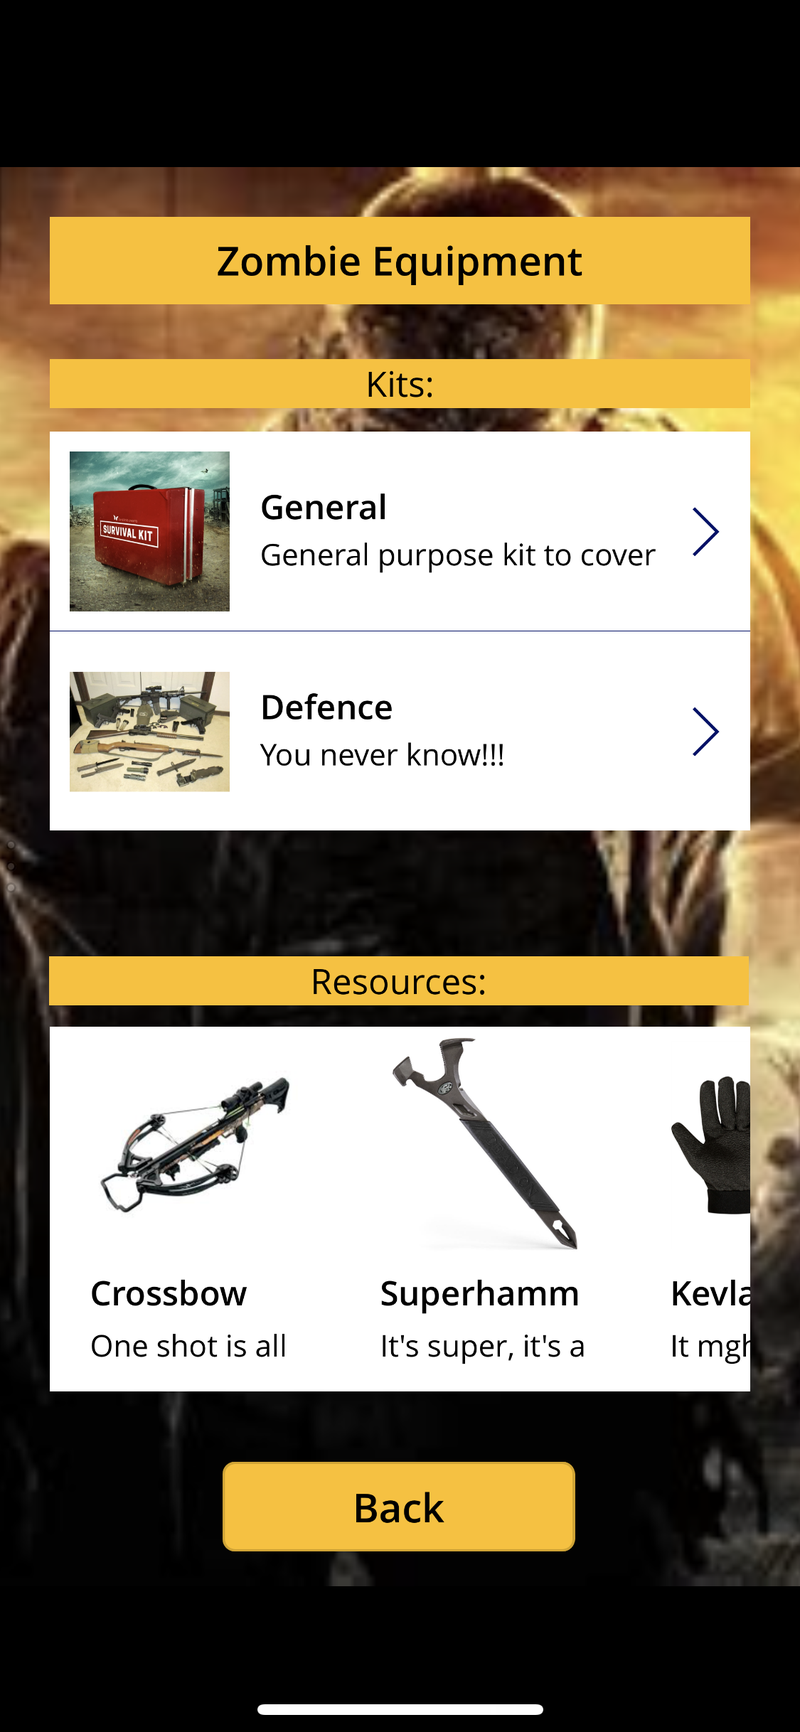 Kit and resources recommended to survive the event